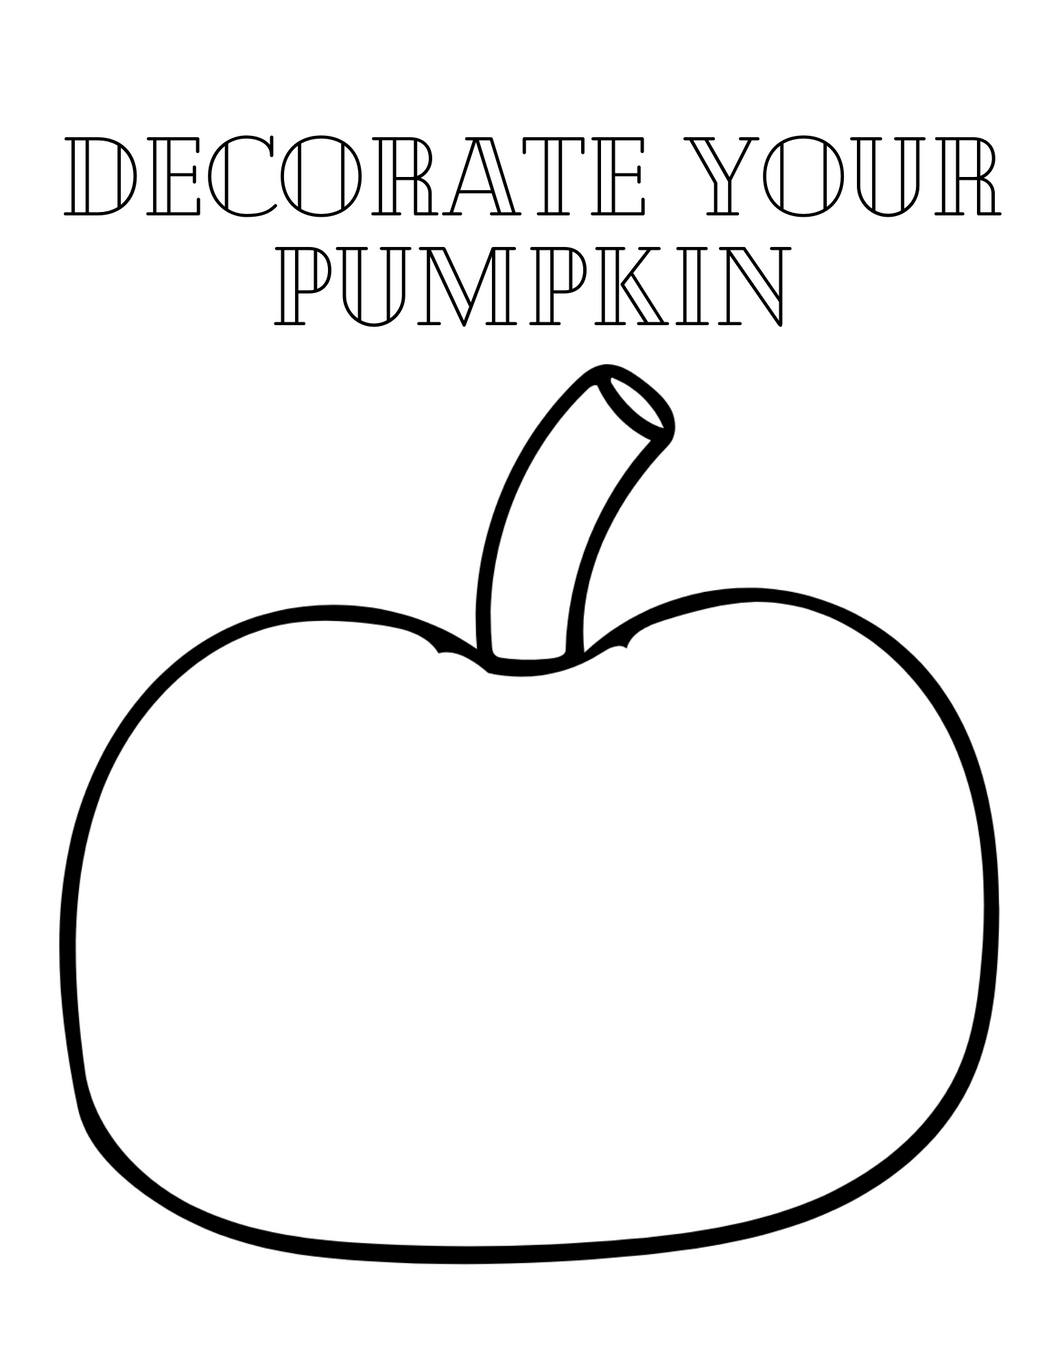 FREE Decorate Your Pumpkin Coloring Sheet